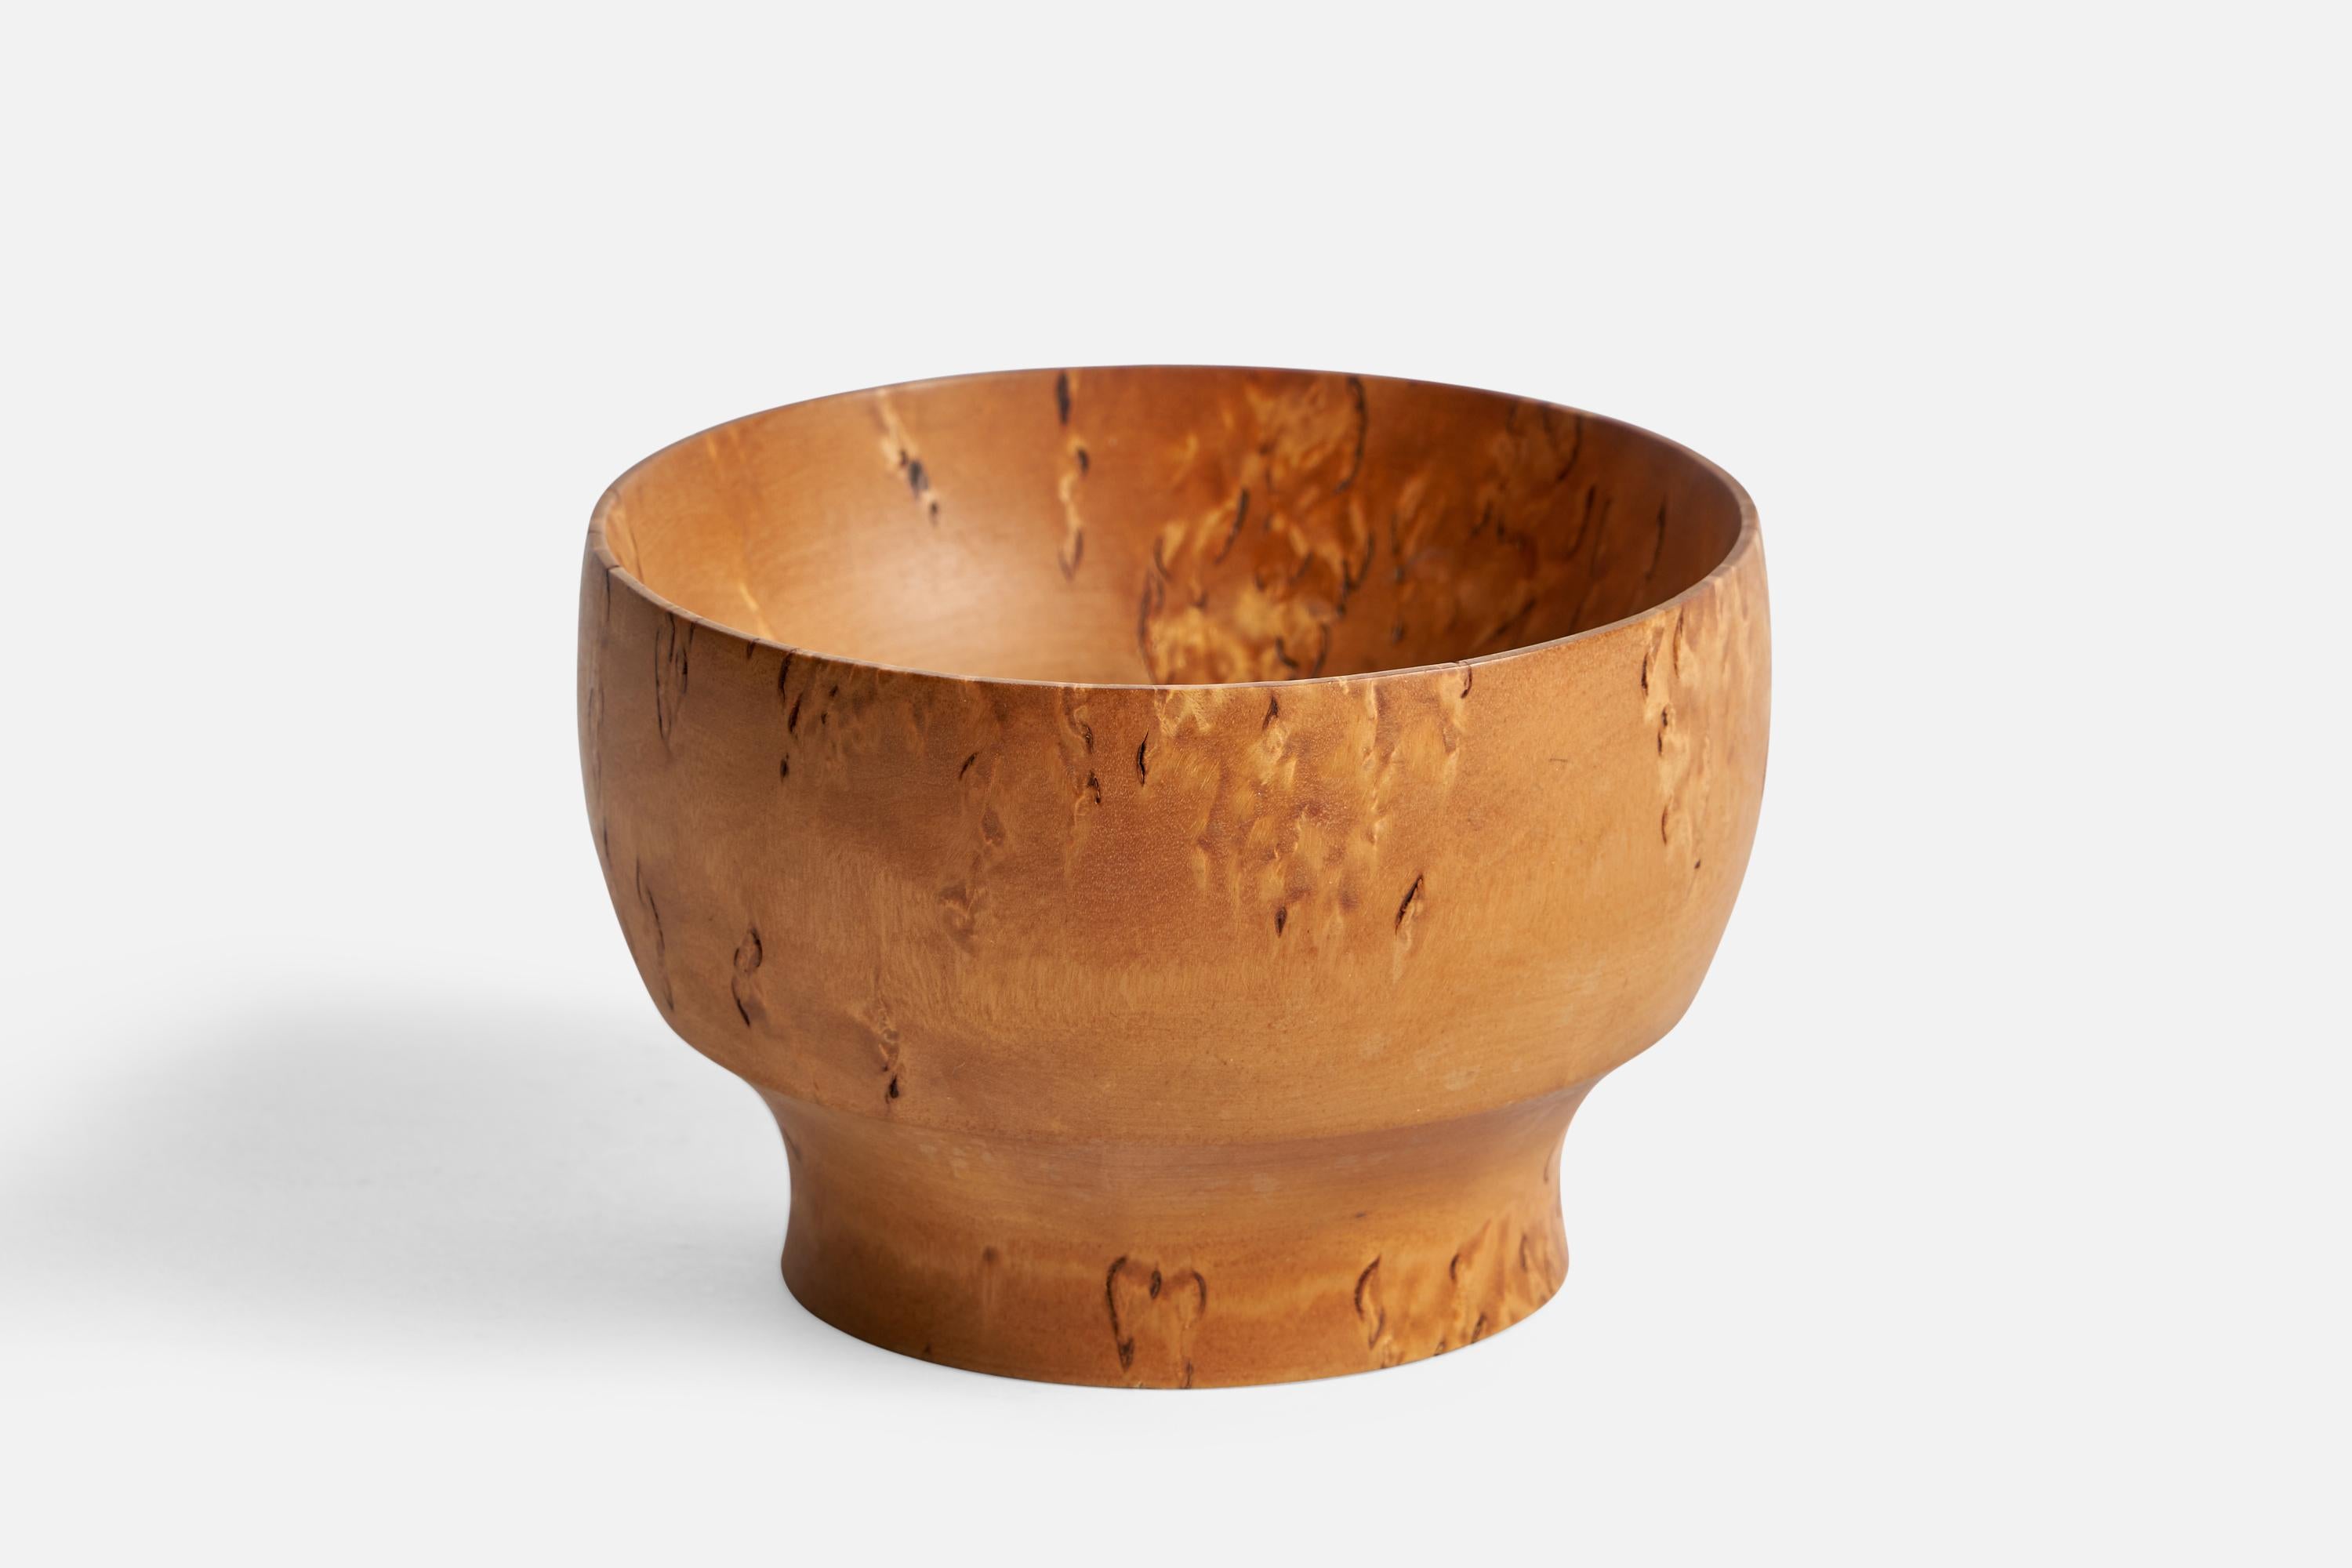 A masur birch bowl designed and produced in Sweden, c. 1950s.